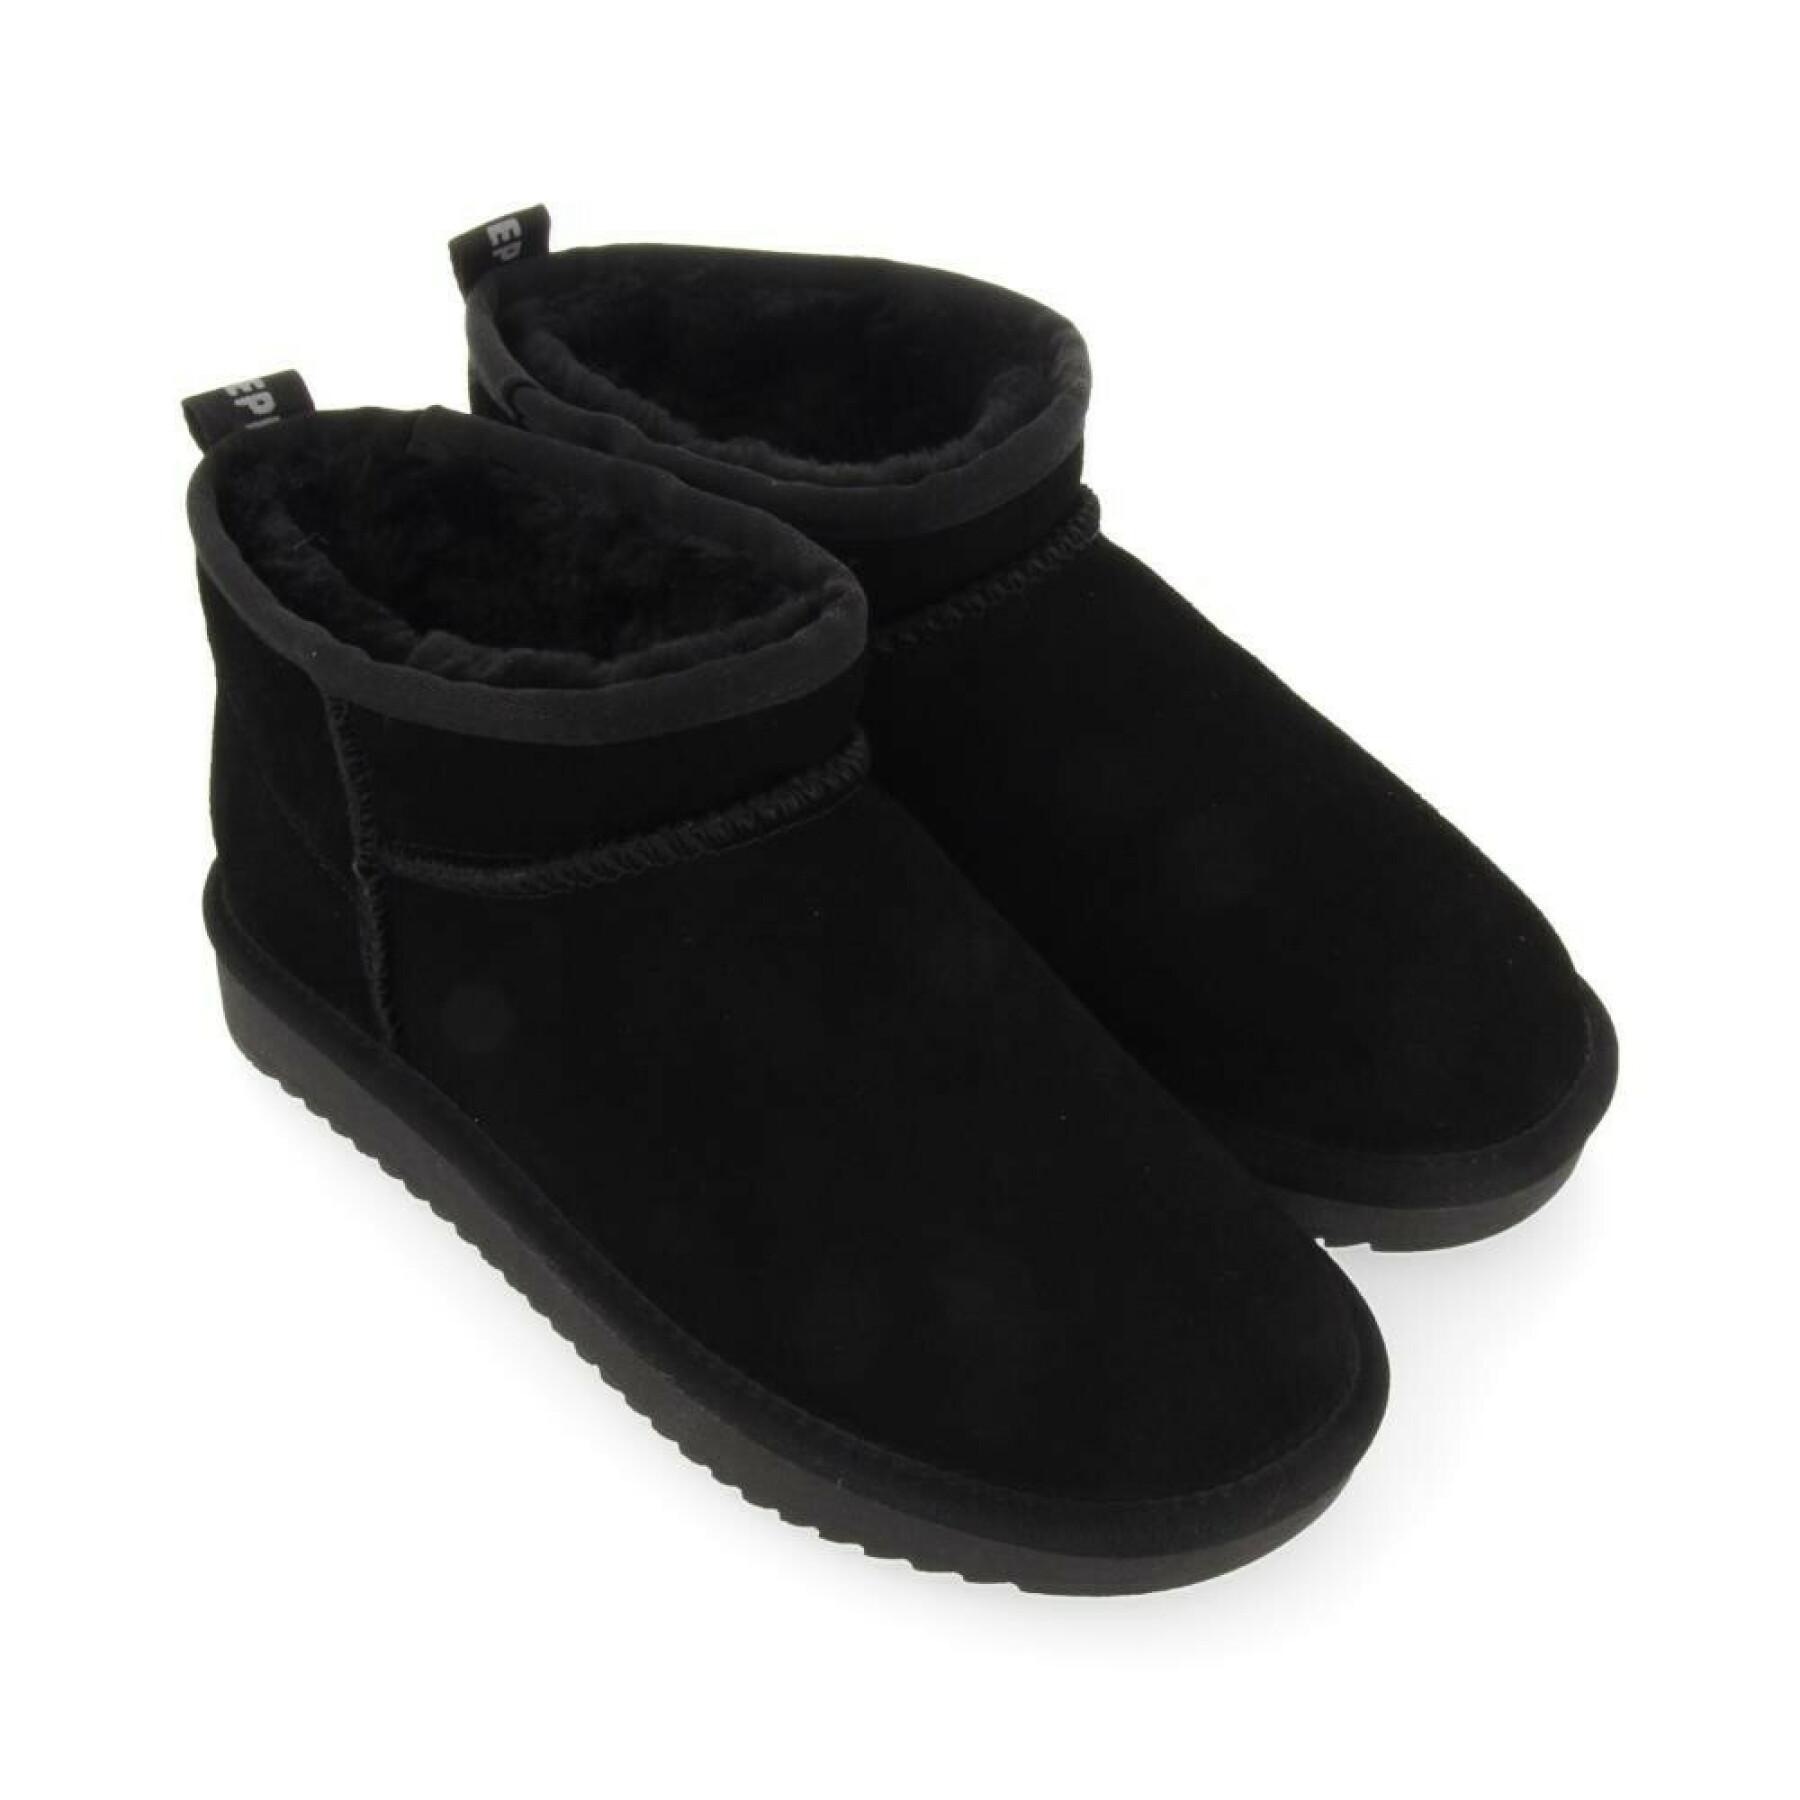 Low boots for women Gioseppo d'hivers noires